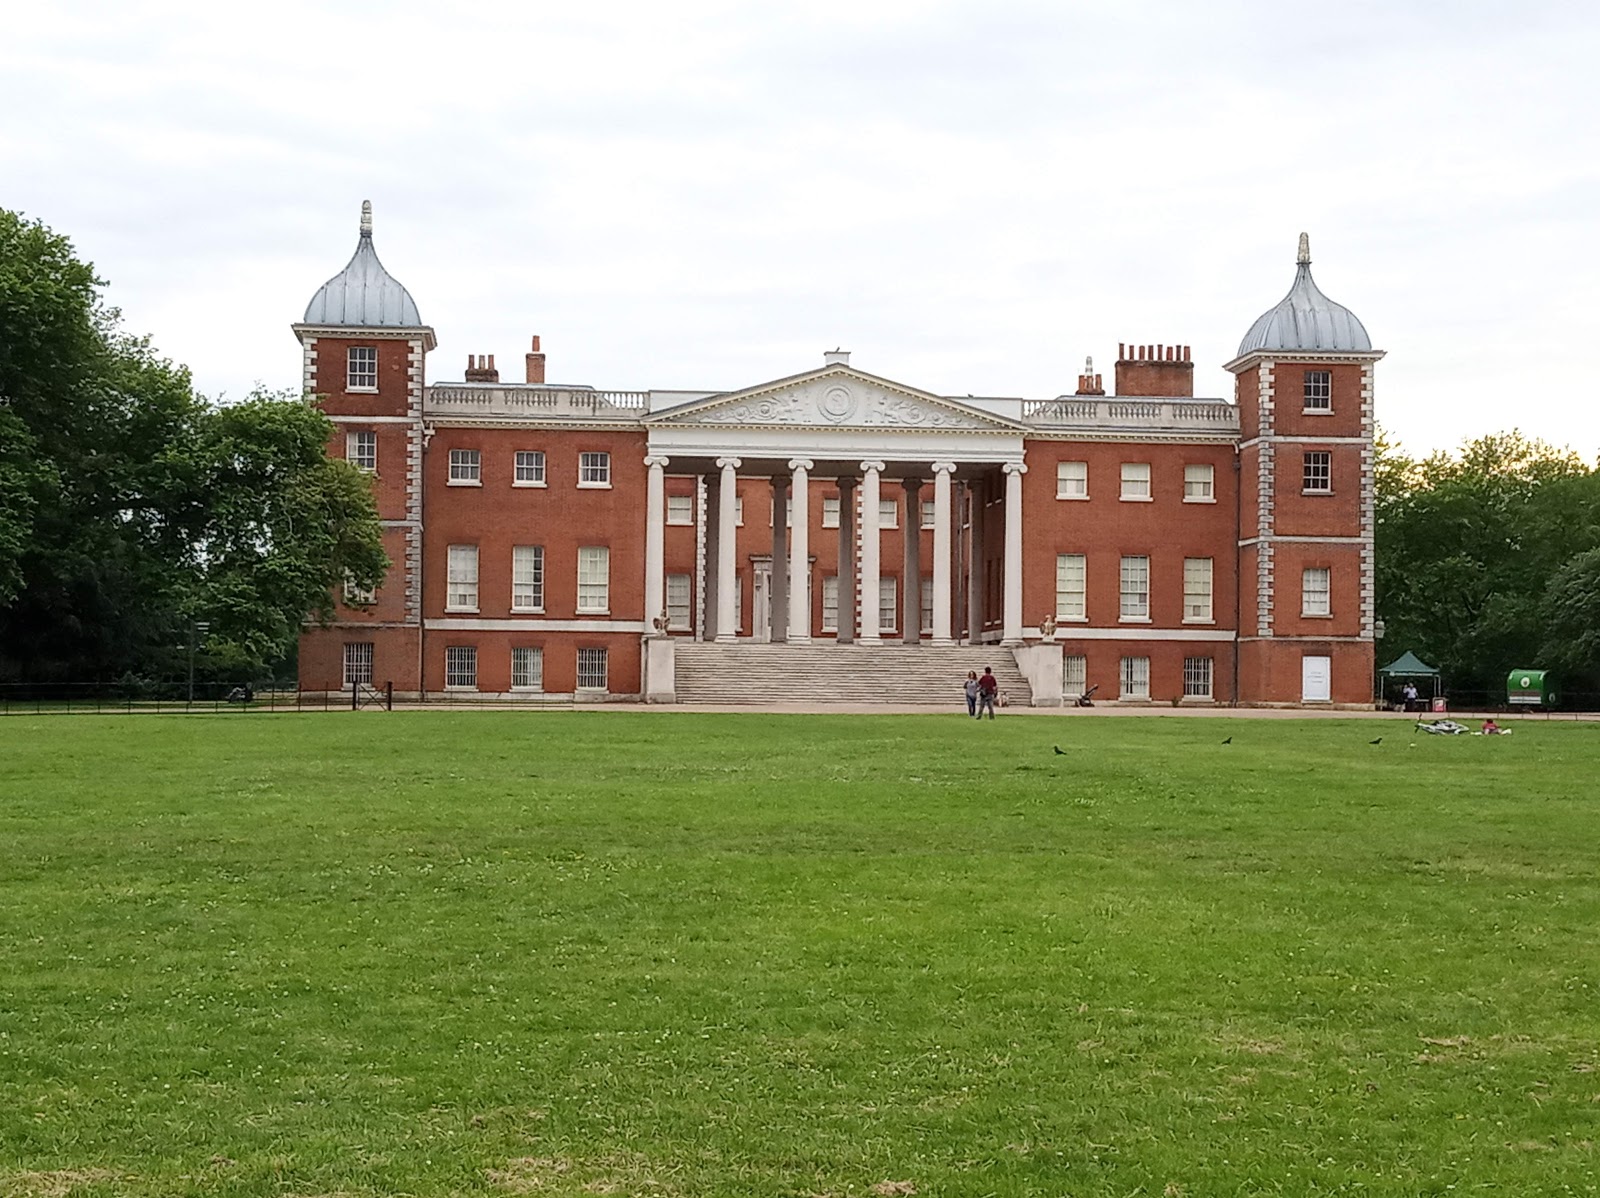 https://whatremovals.co.uk/wp-content/uploads/2022/02/National Trust - Osterley Park and House-300x225.jpeg